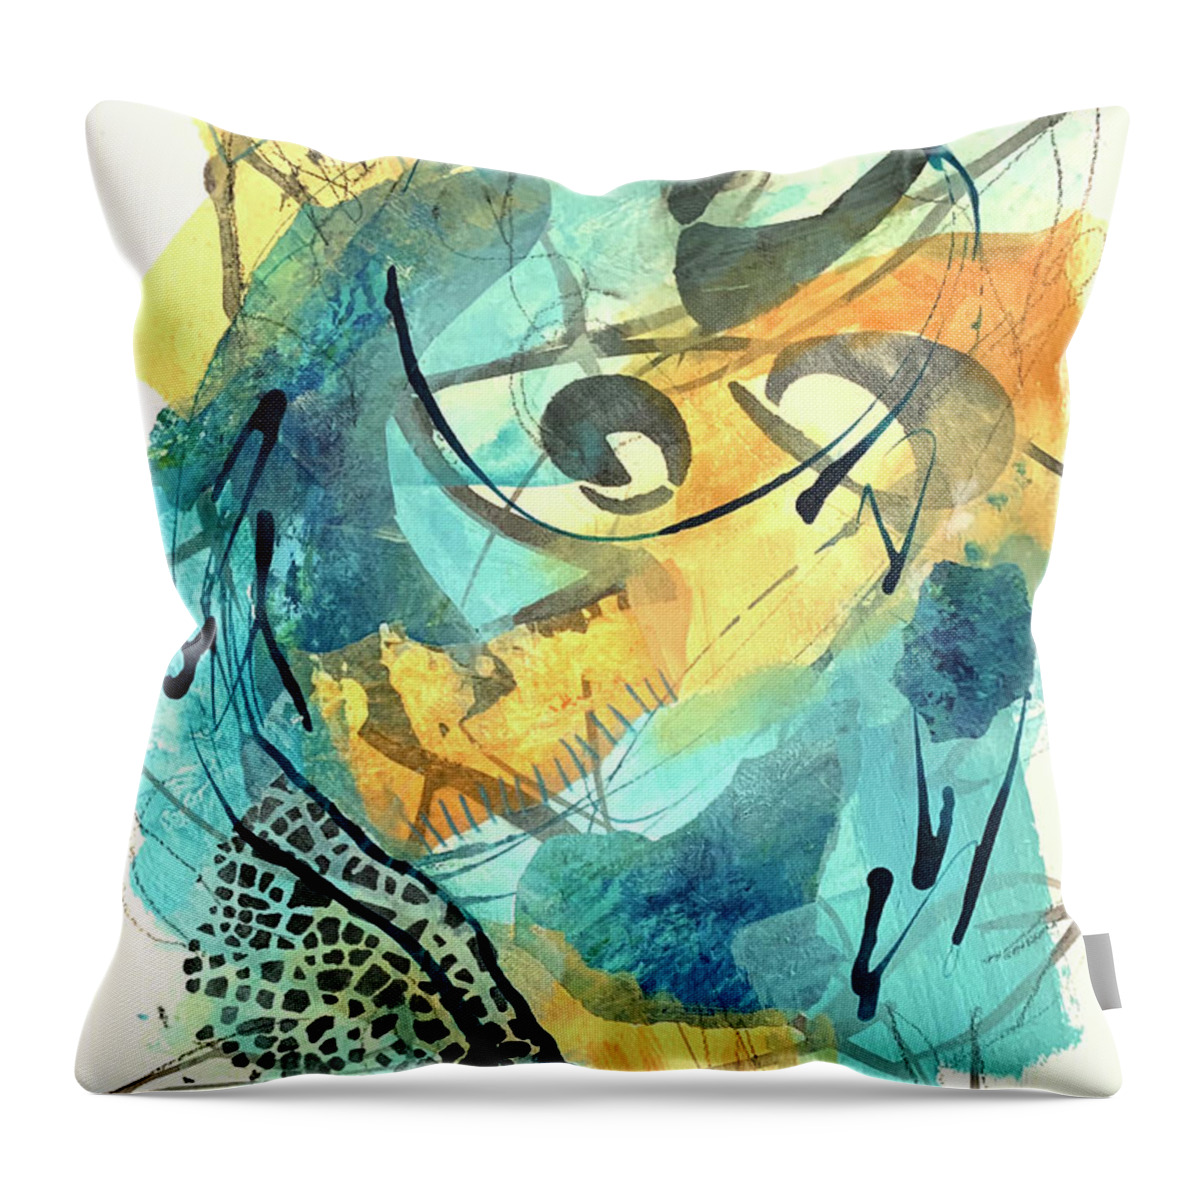 Turqouise Throw Pillow featuring the painting Music Vibes 3 by Cheryl Rhodes